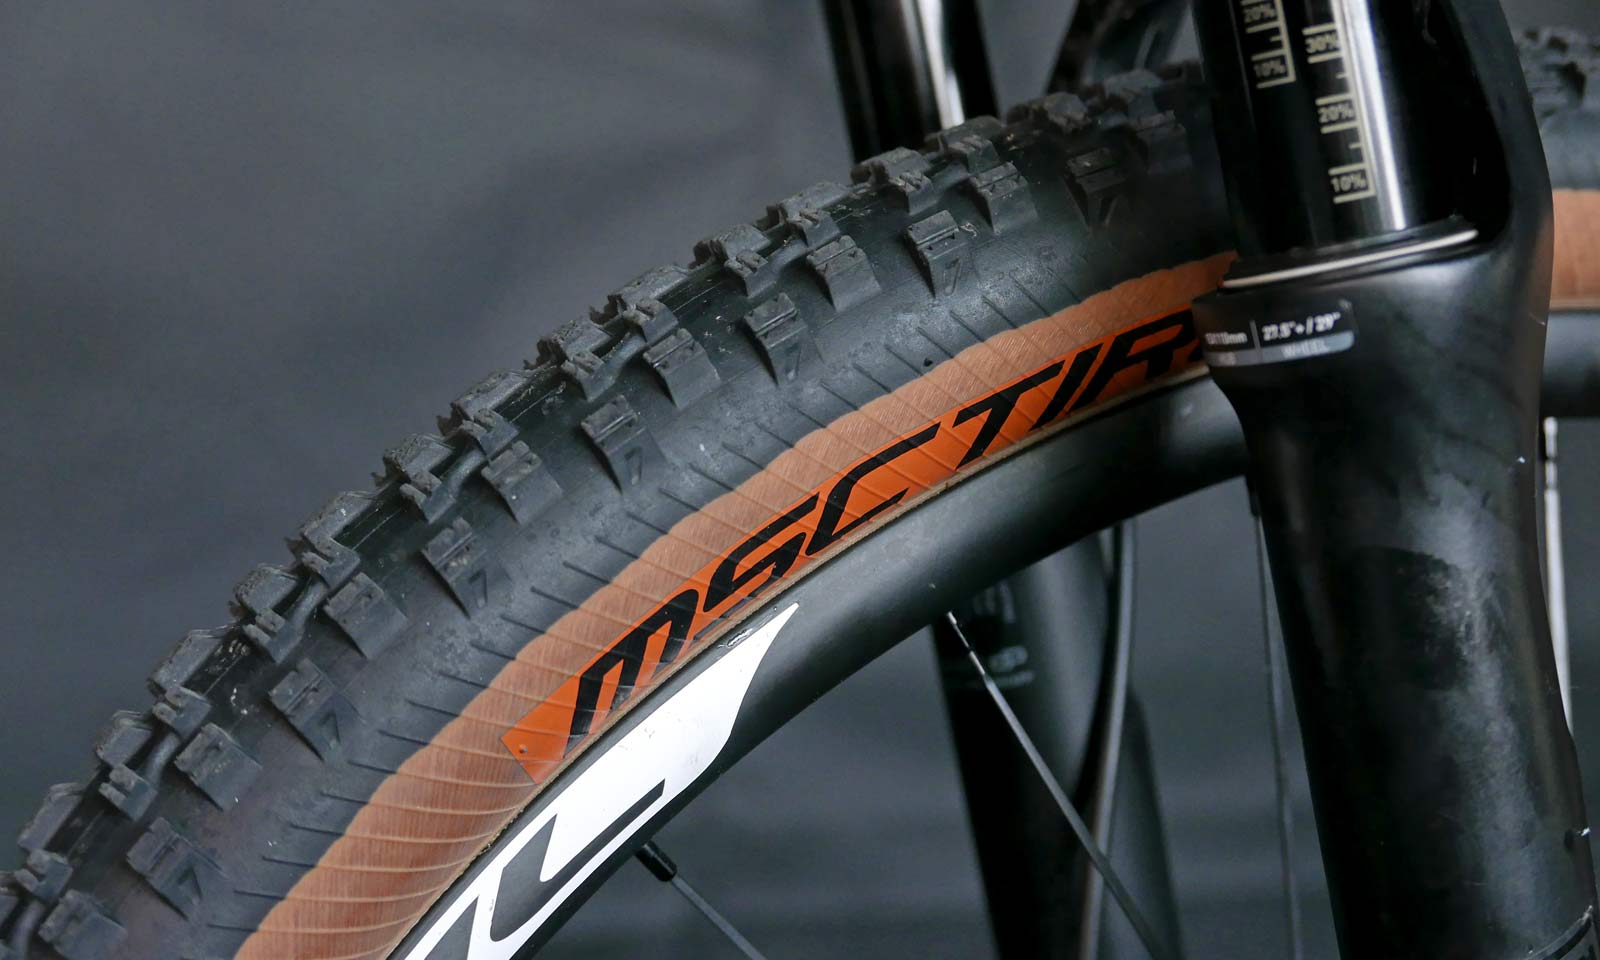 solid core bike tires